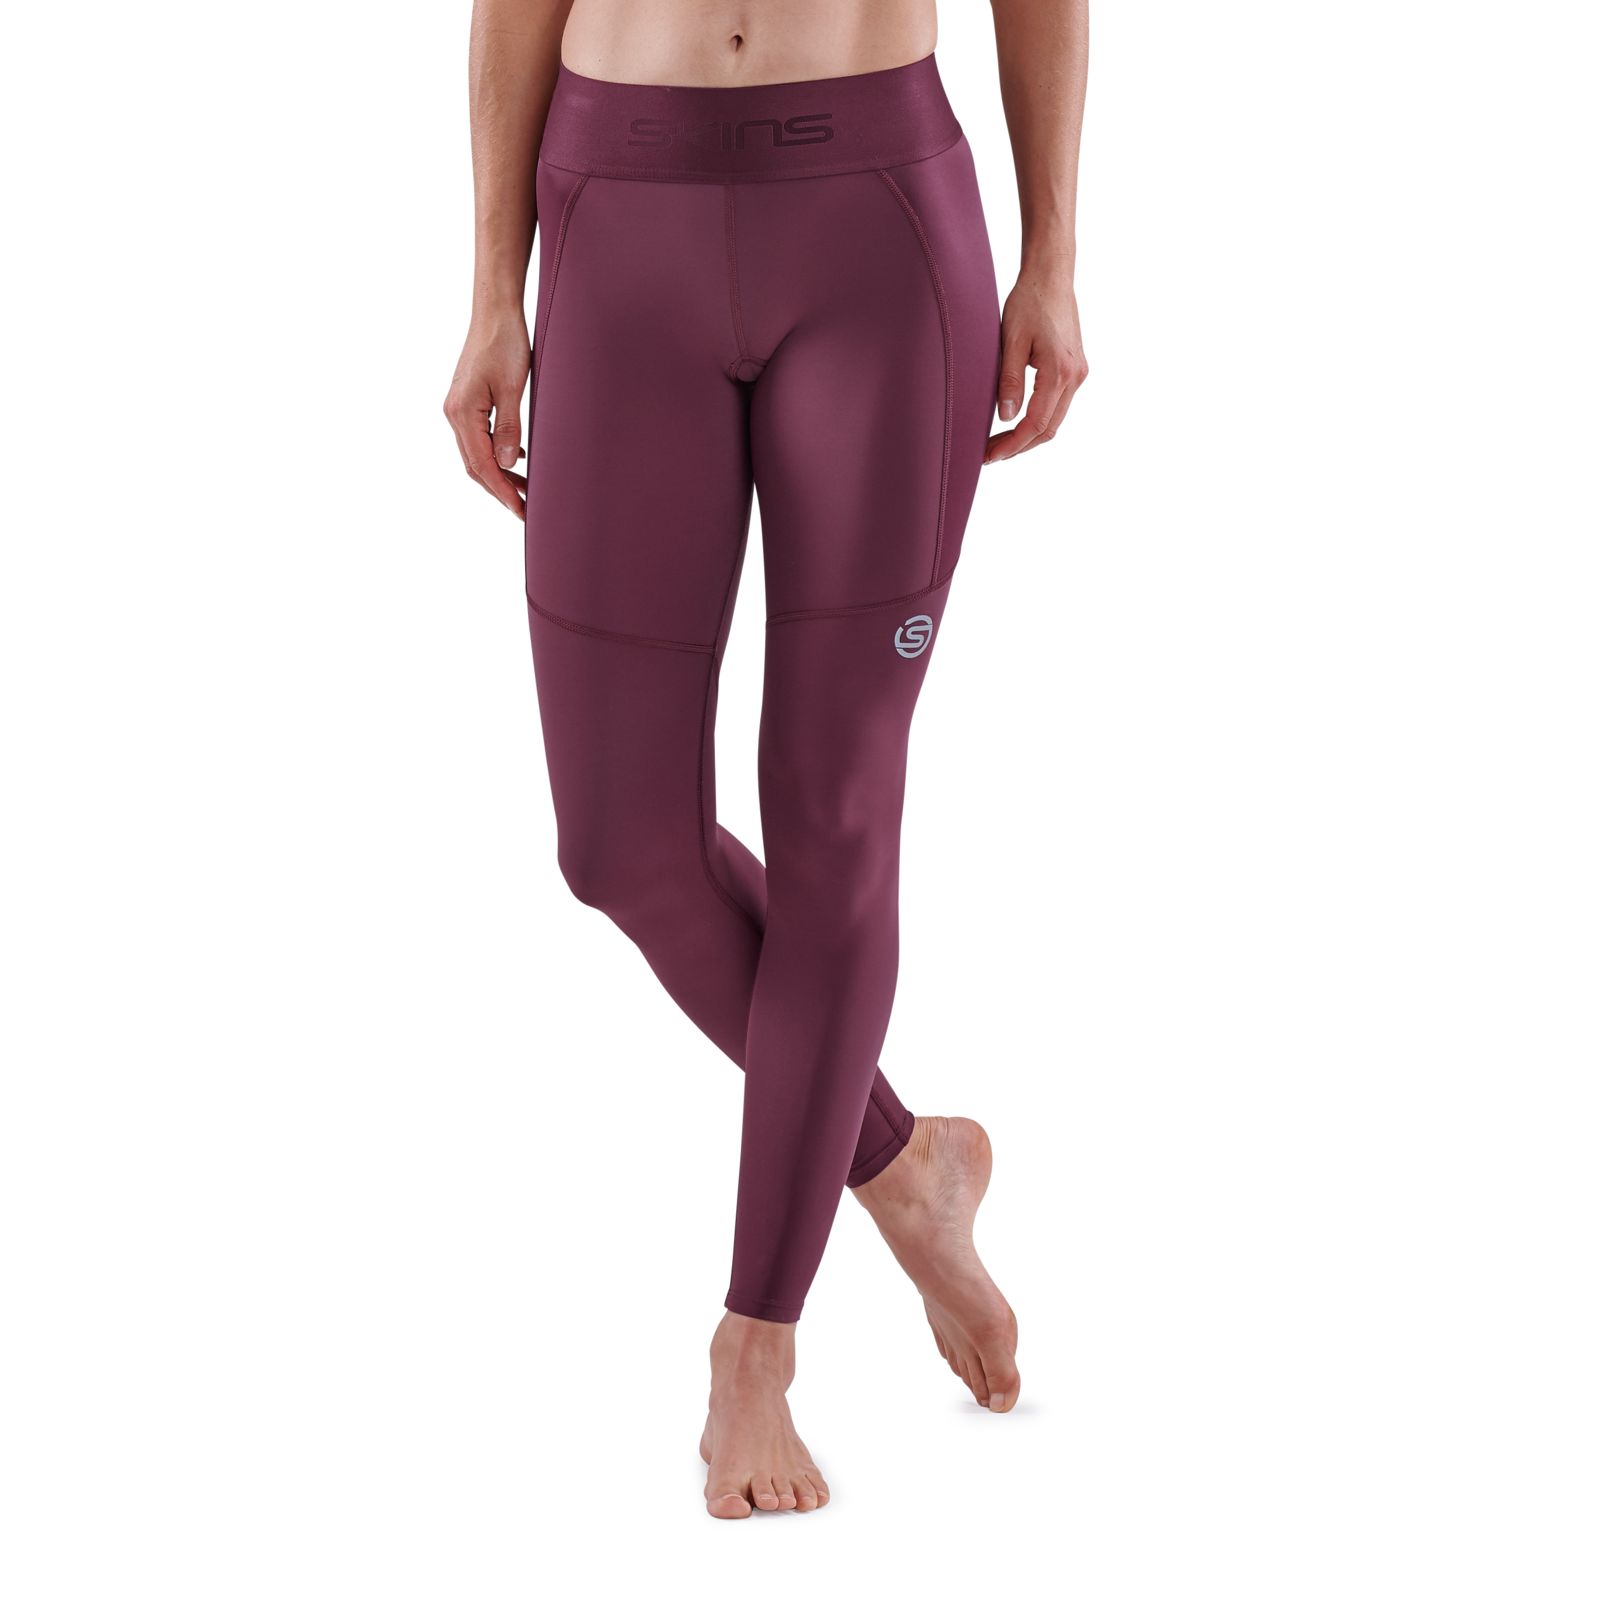 SKINS SERIES-3 WOMEN'S THERMAL LONG TIGHTS BURGUNDY - SKINS Compression USA